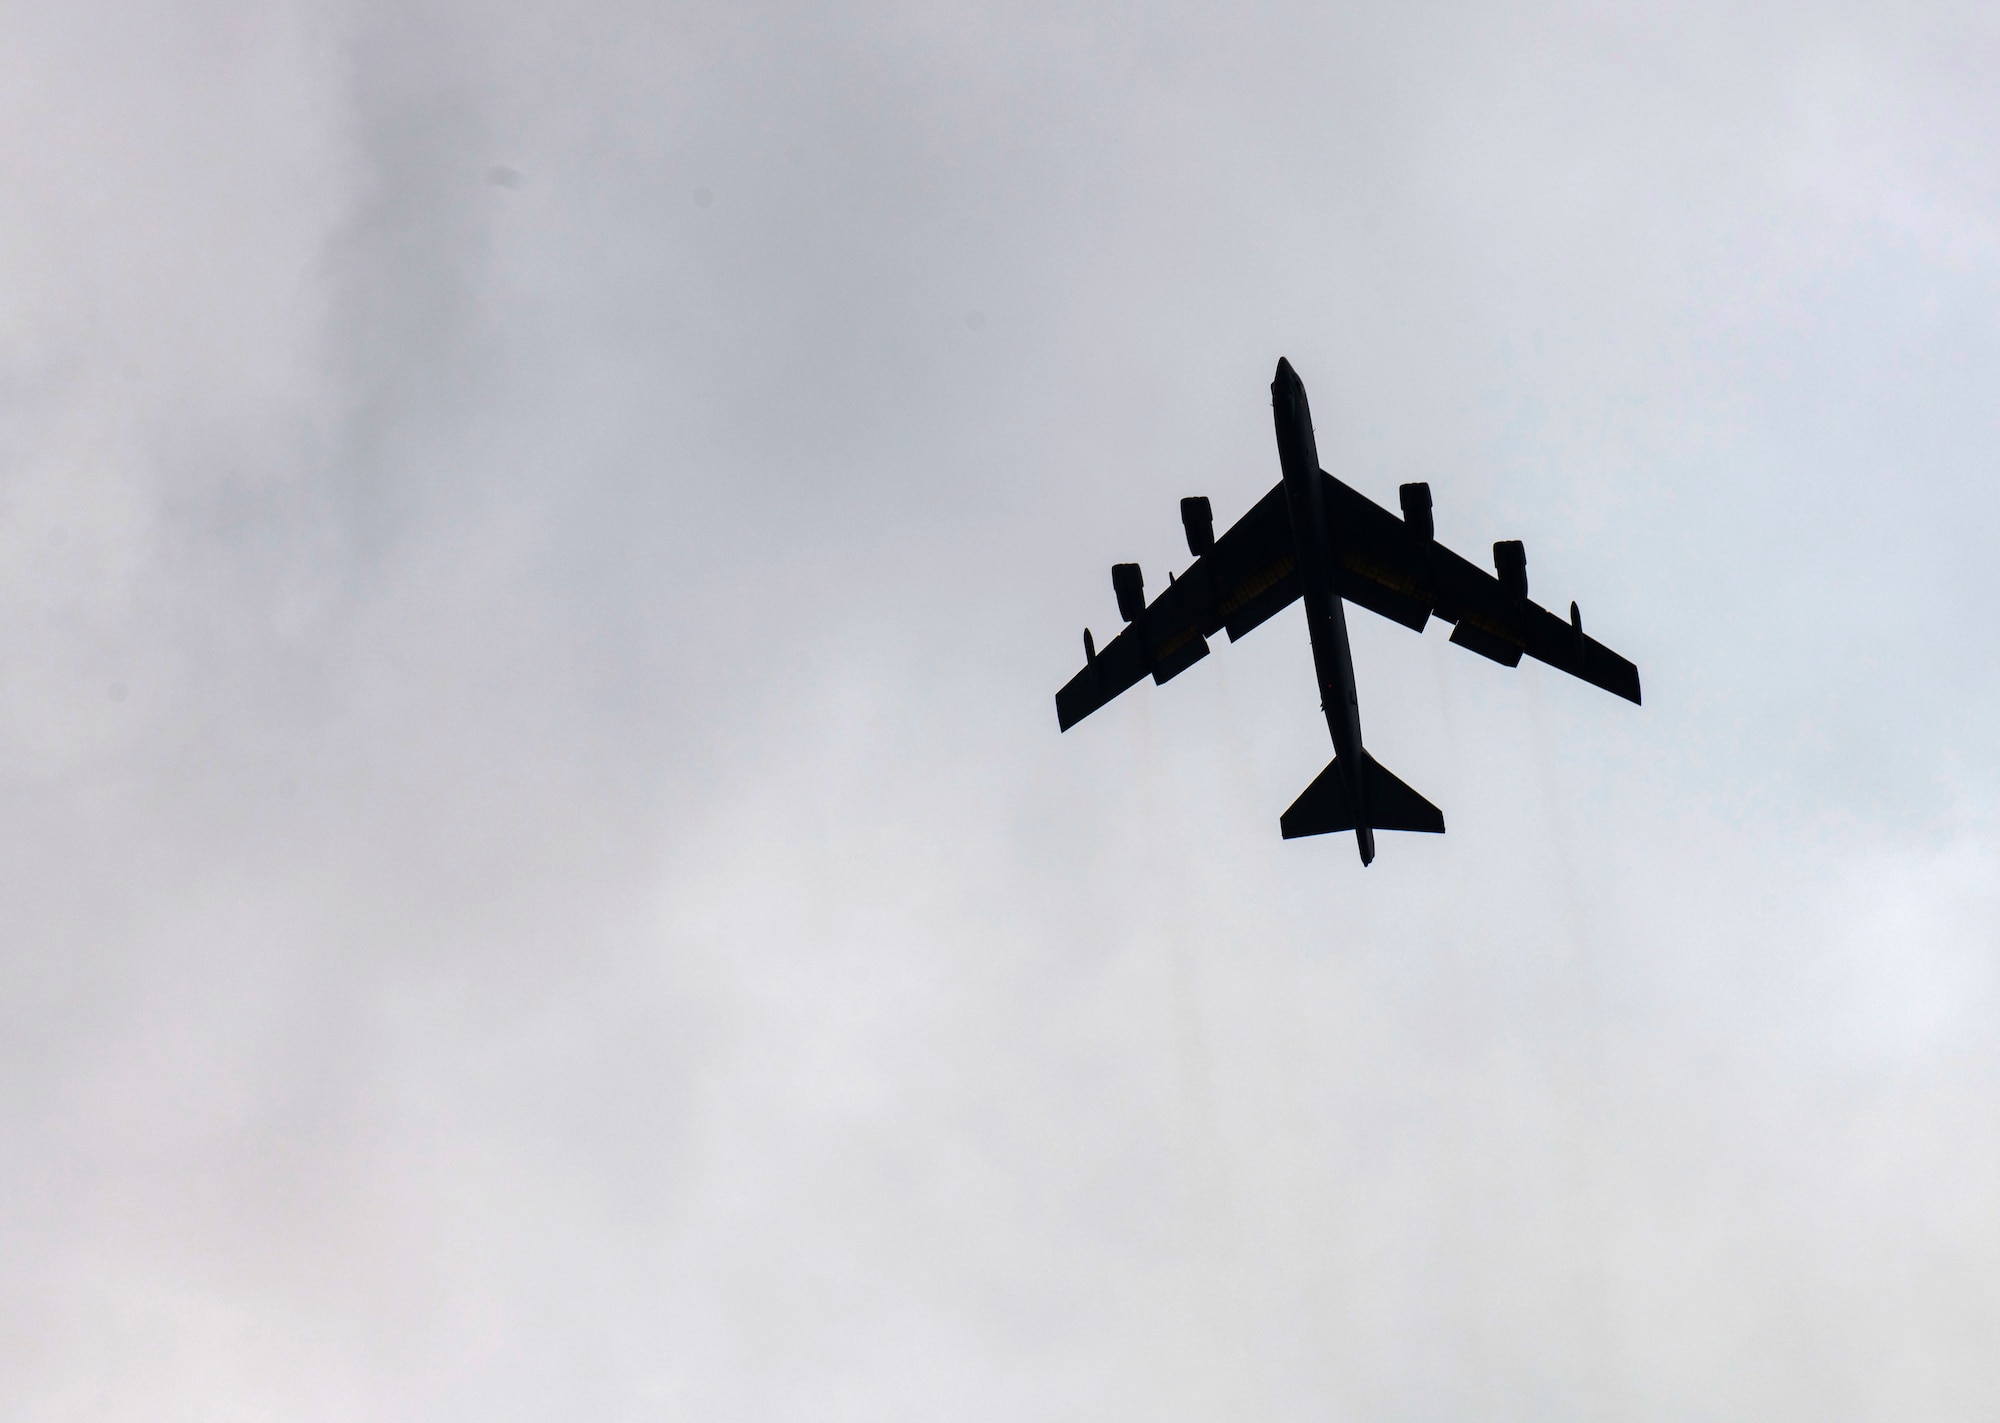 A B-52 Stratofortress aircraft, assigned to the 23rd Expeditionary Bomb Squadron, flies over RAF Fairford